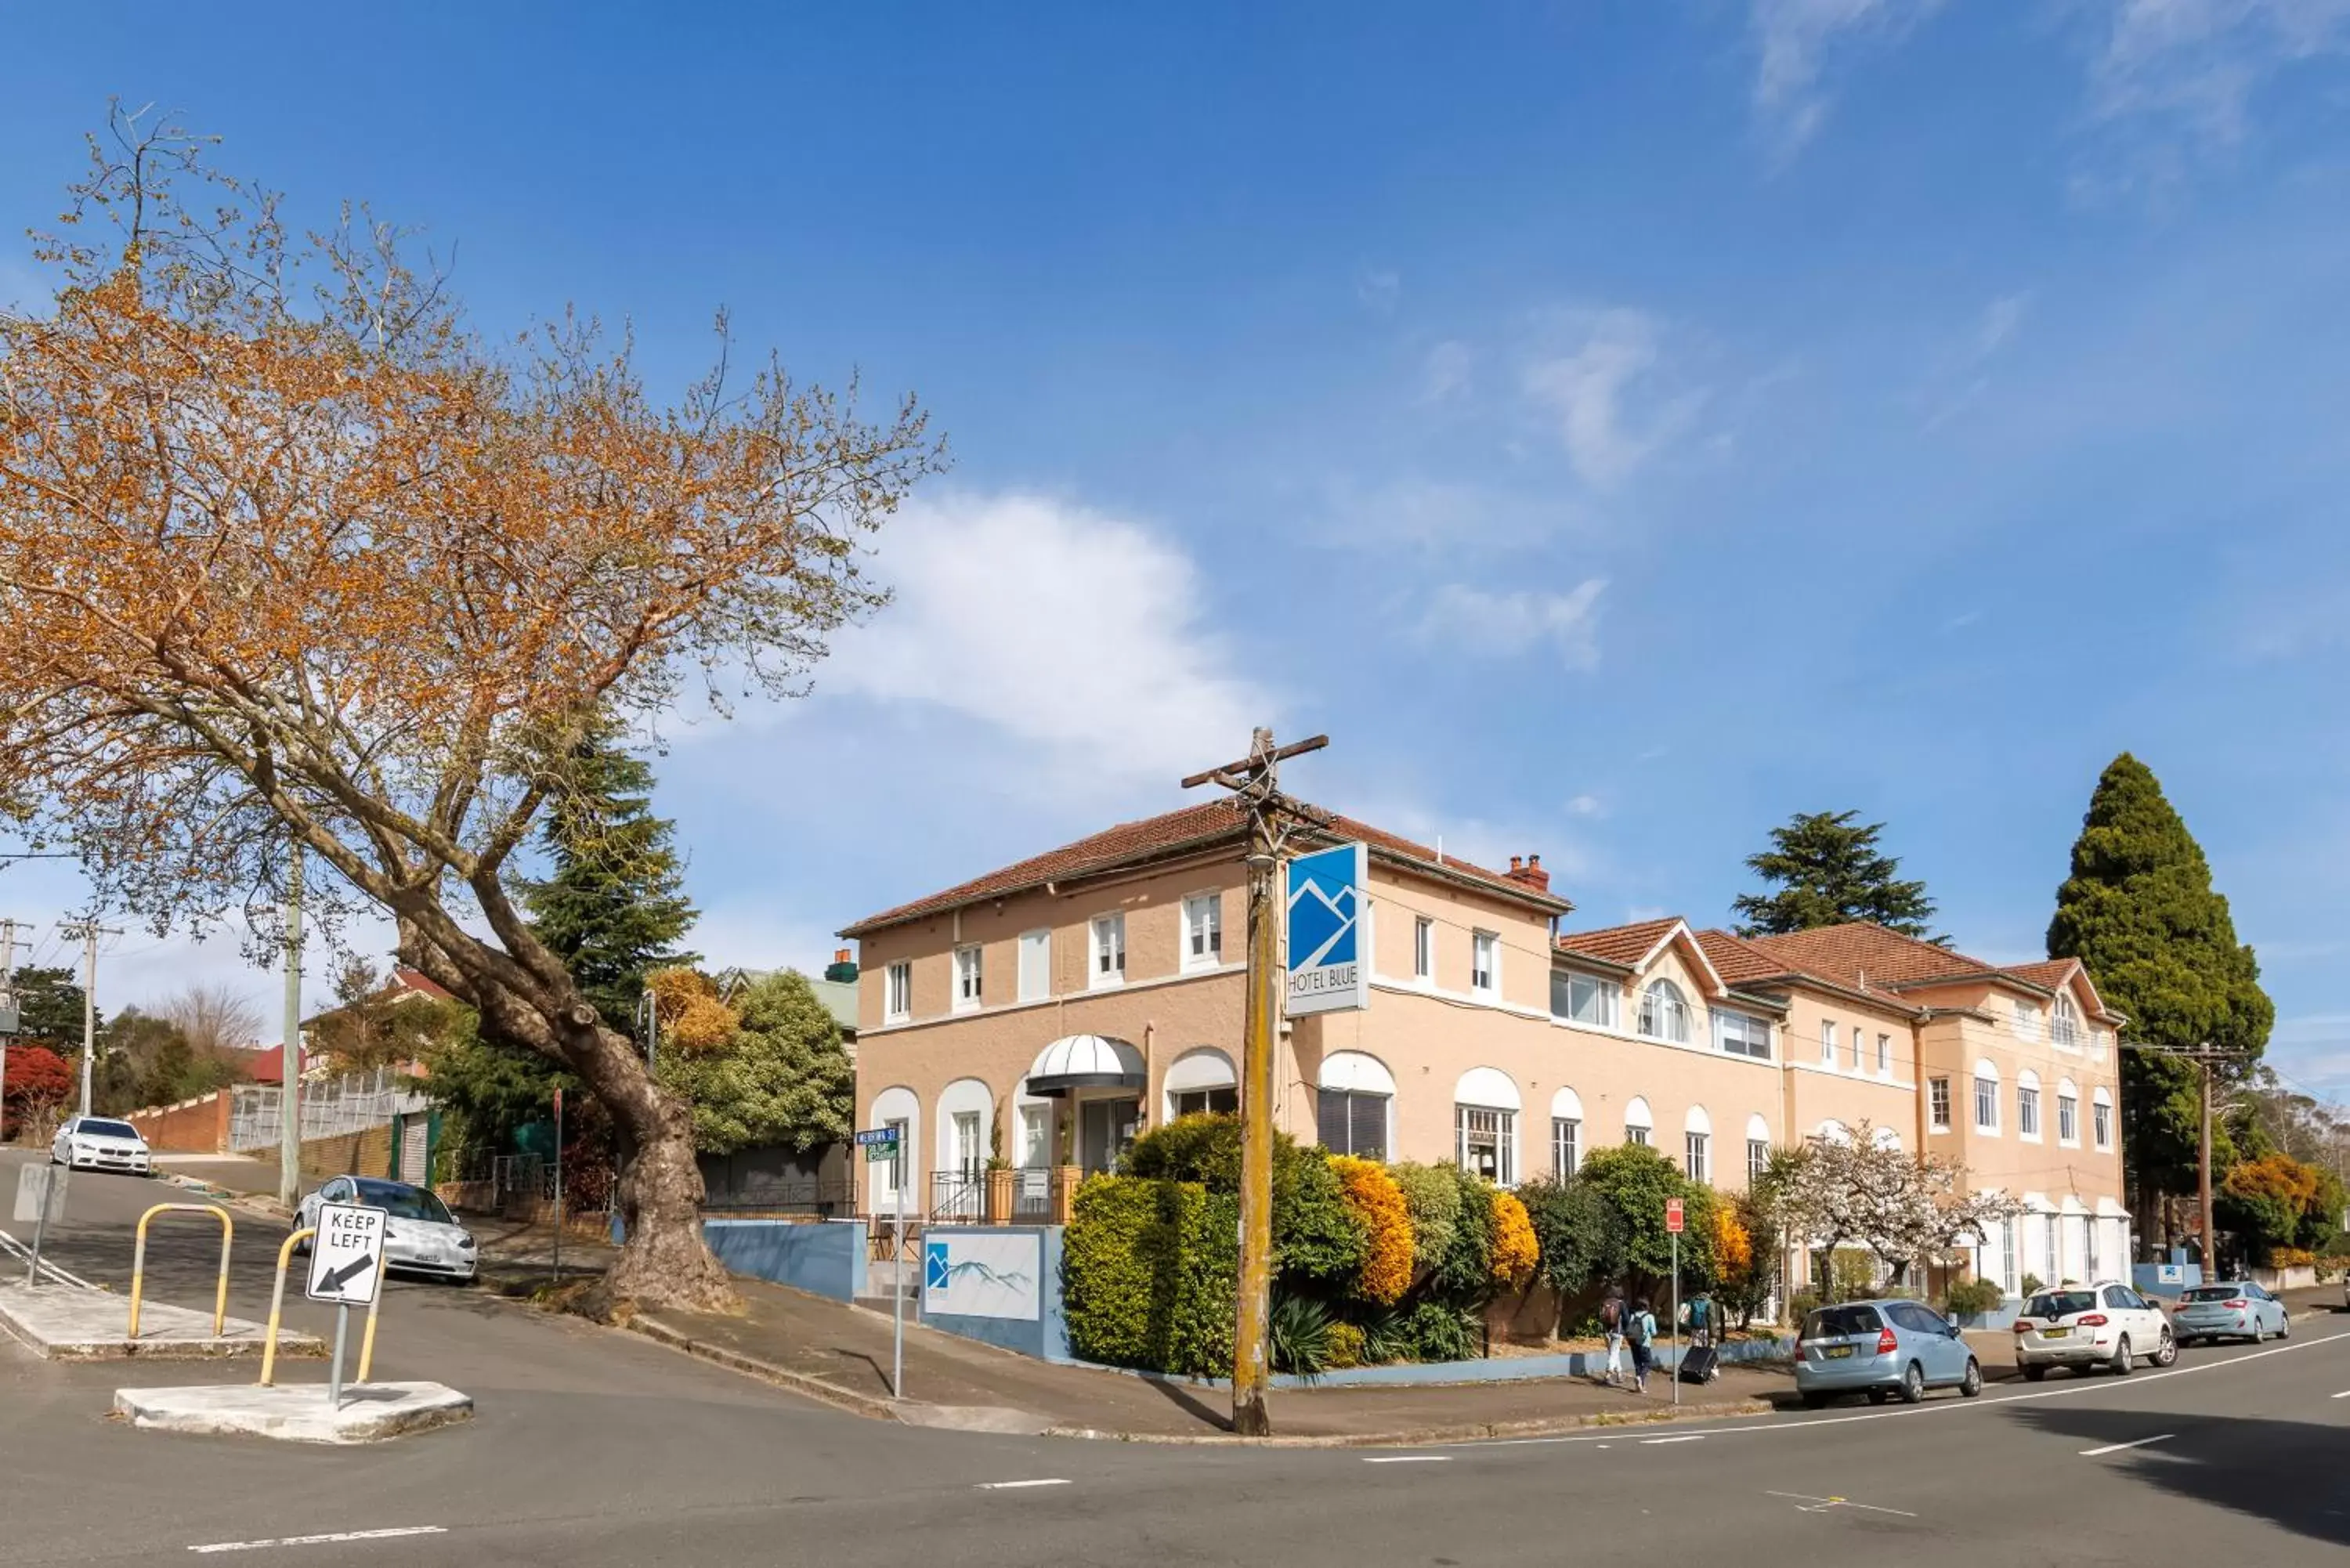 Property Building in Hotel Blue & Cottages Katoomba